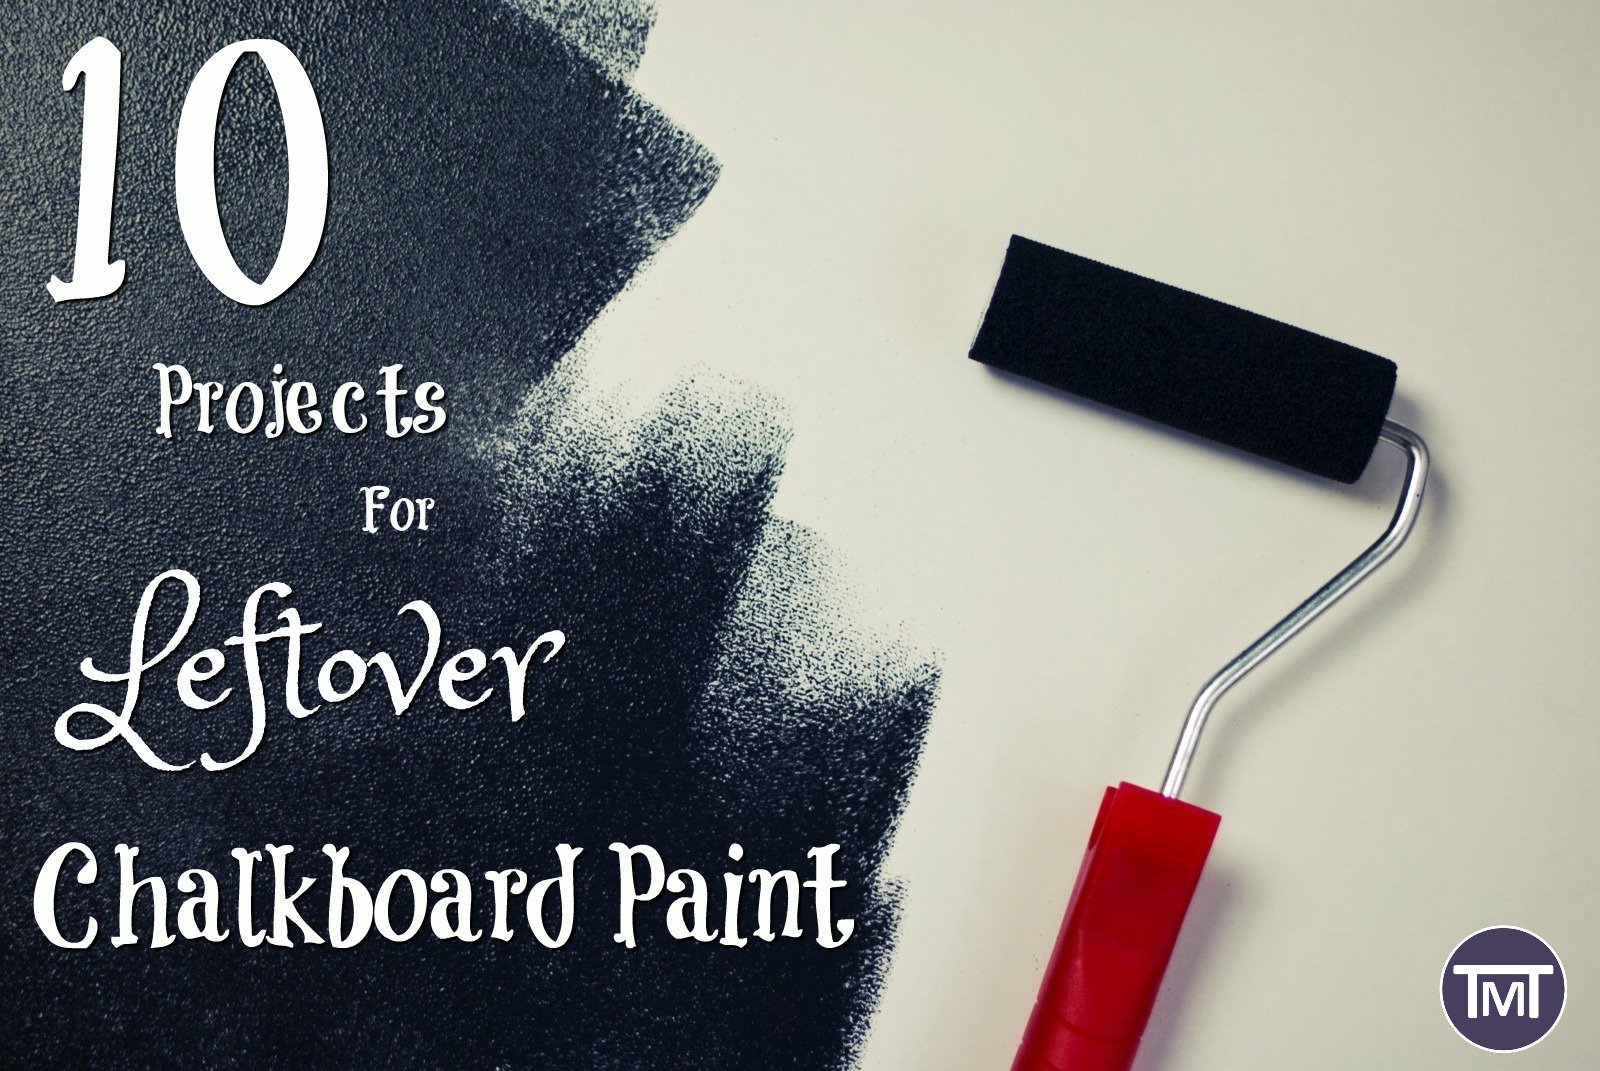 I completely overbought chalkboard paint and so, after some research, here are some of my favourite and stylish ways to use it up, plus a bonus recipe too!